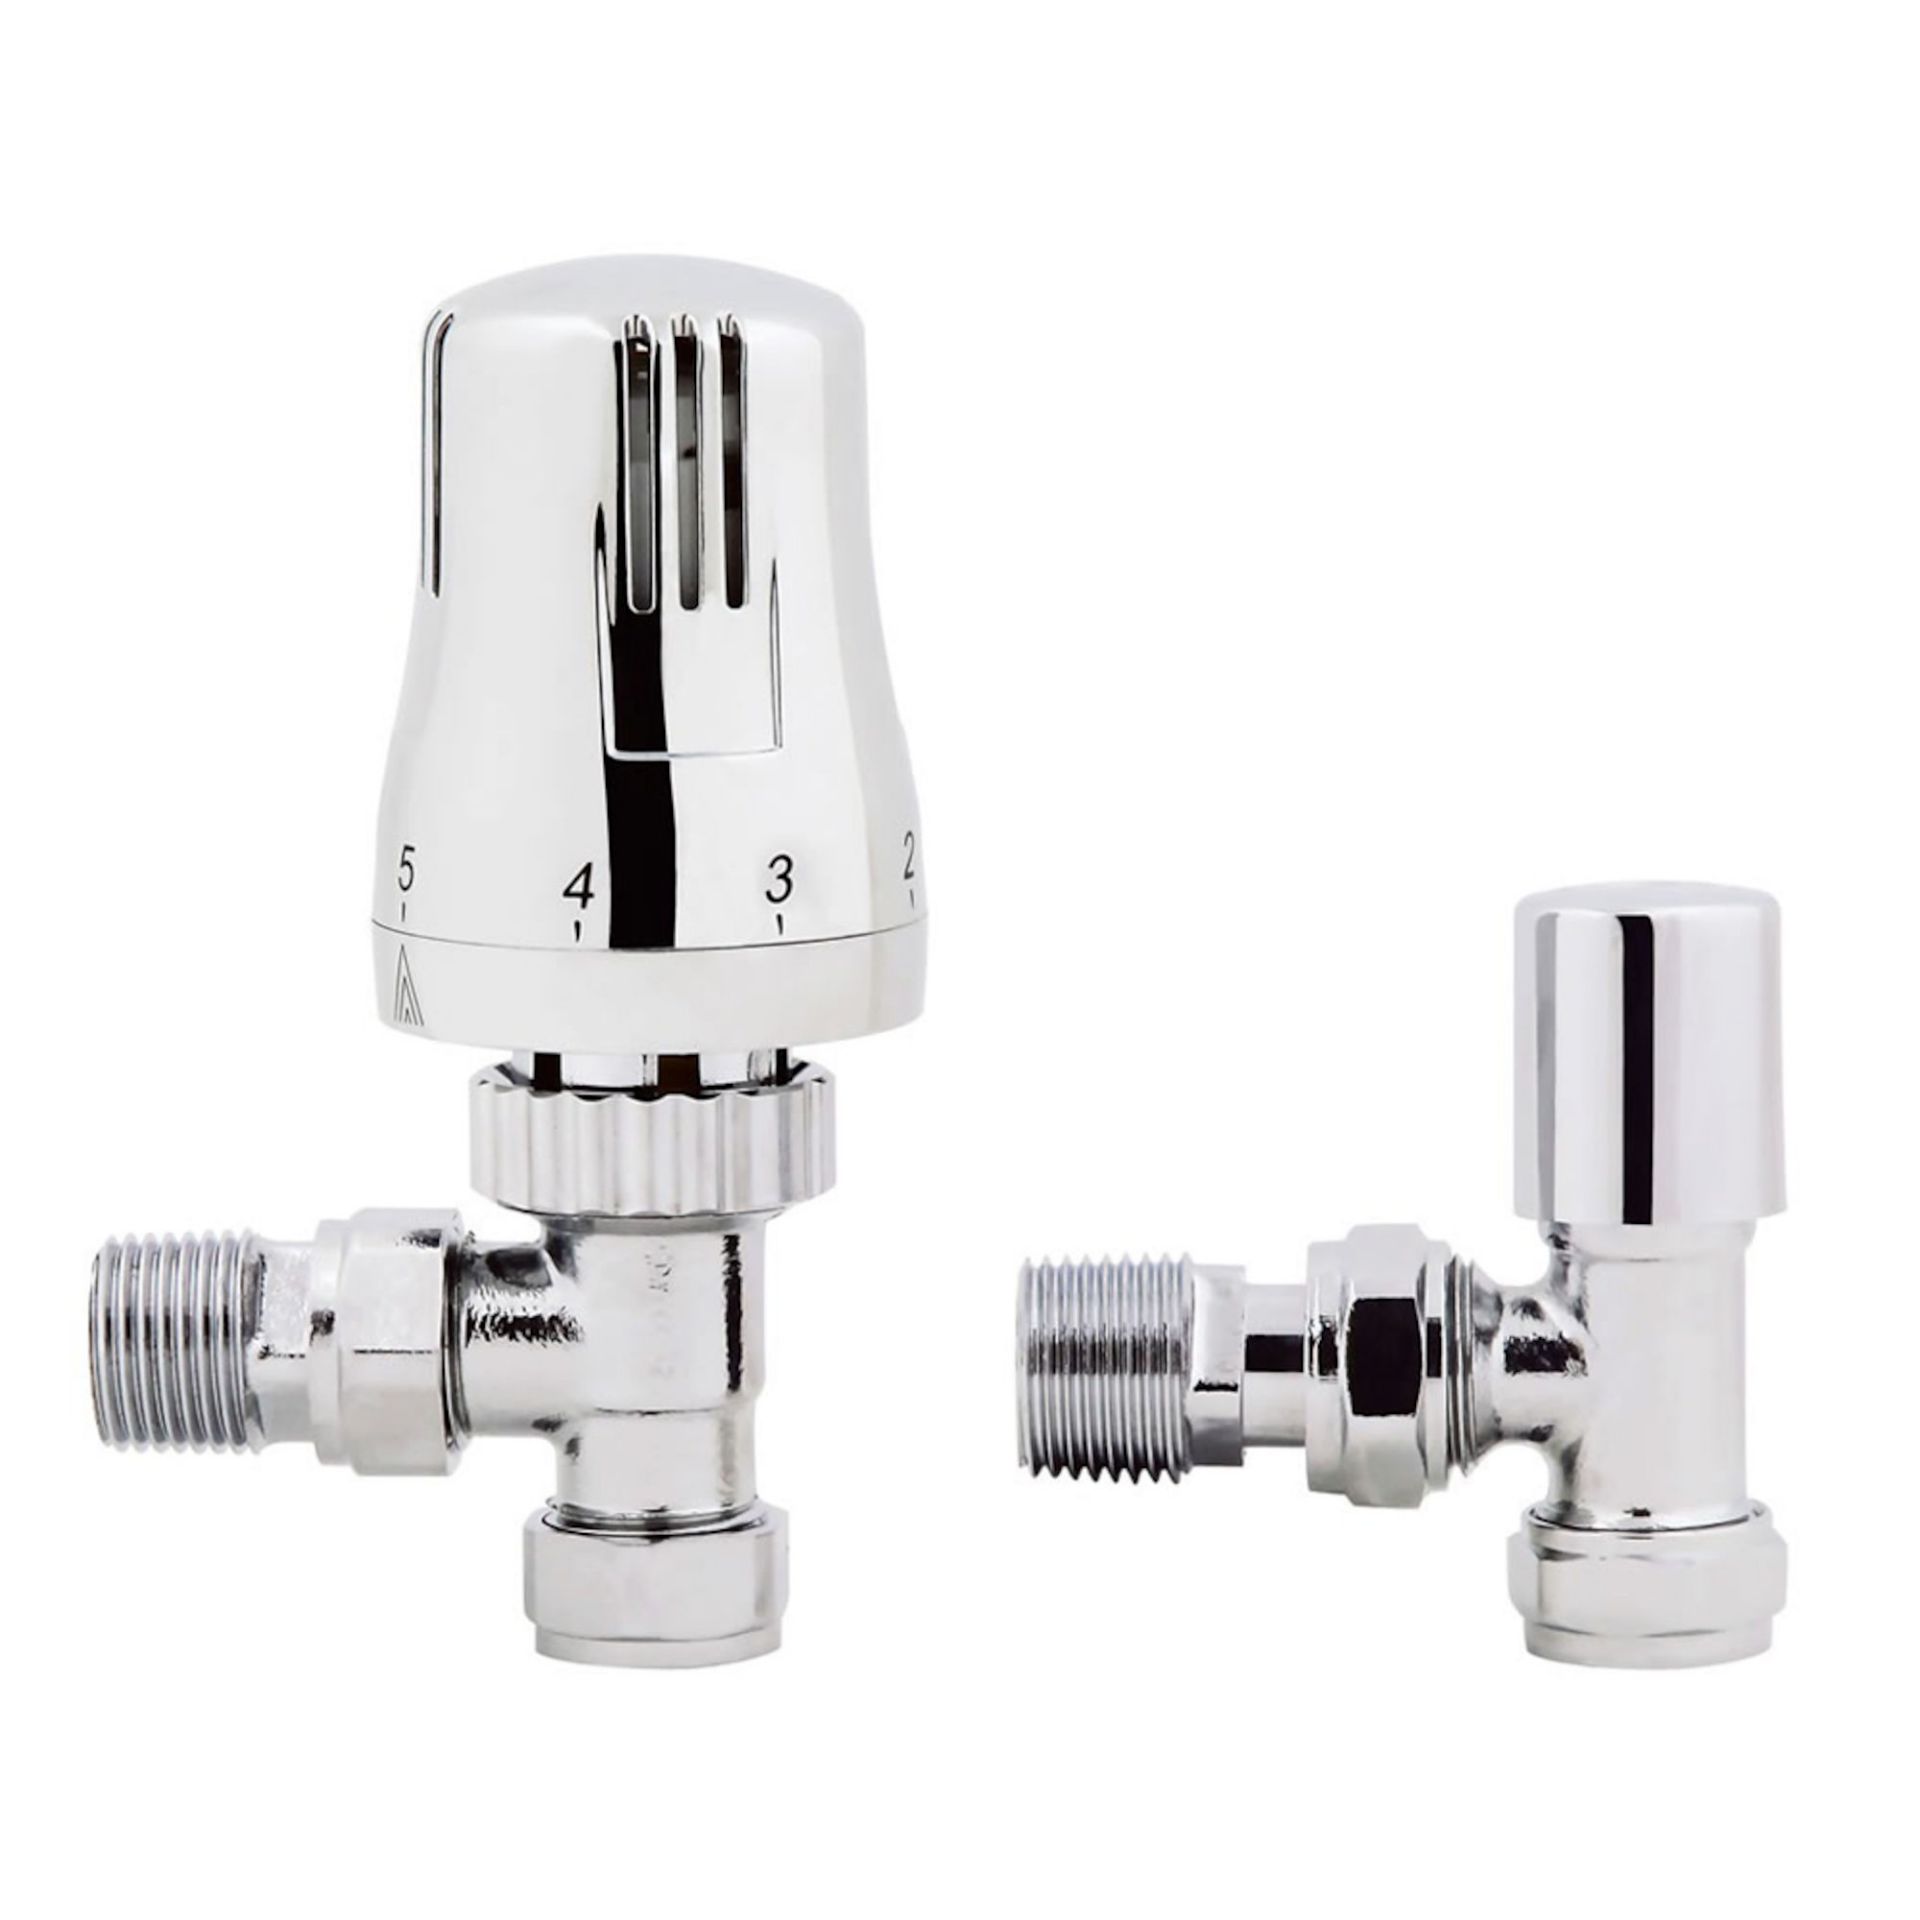 (DW50) 15mm Standard Connection Thermostatic Angled Chrome Radiator Valves Chrome Plated Solid... - Image 2 of 3